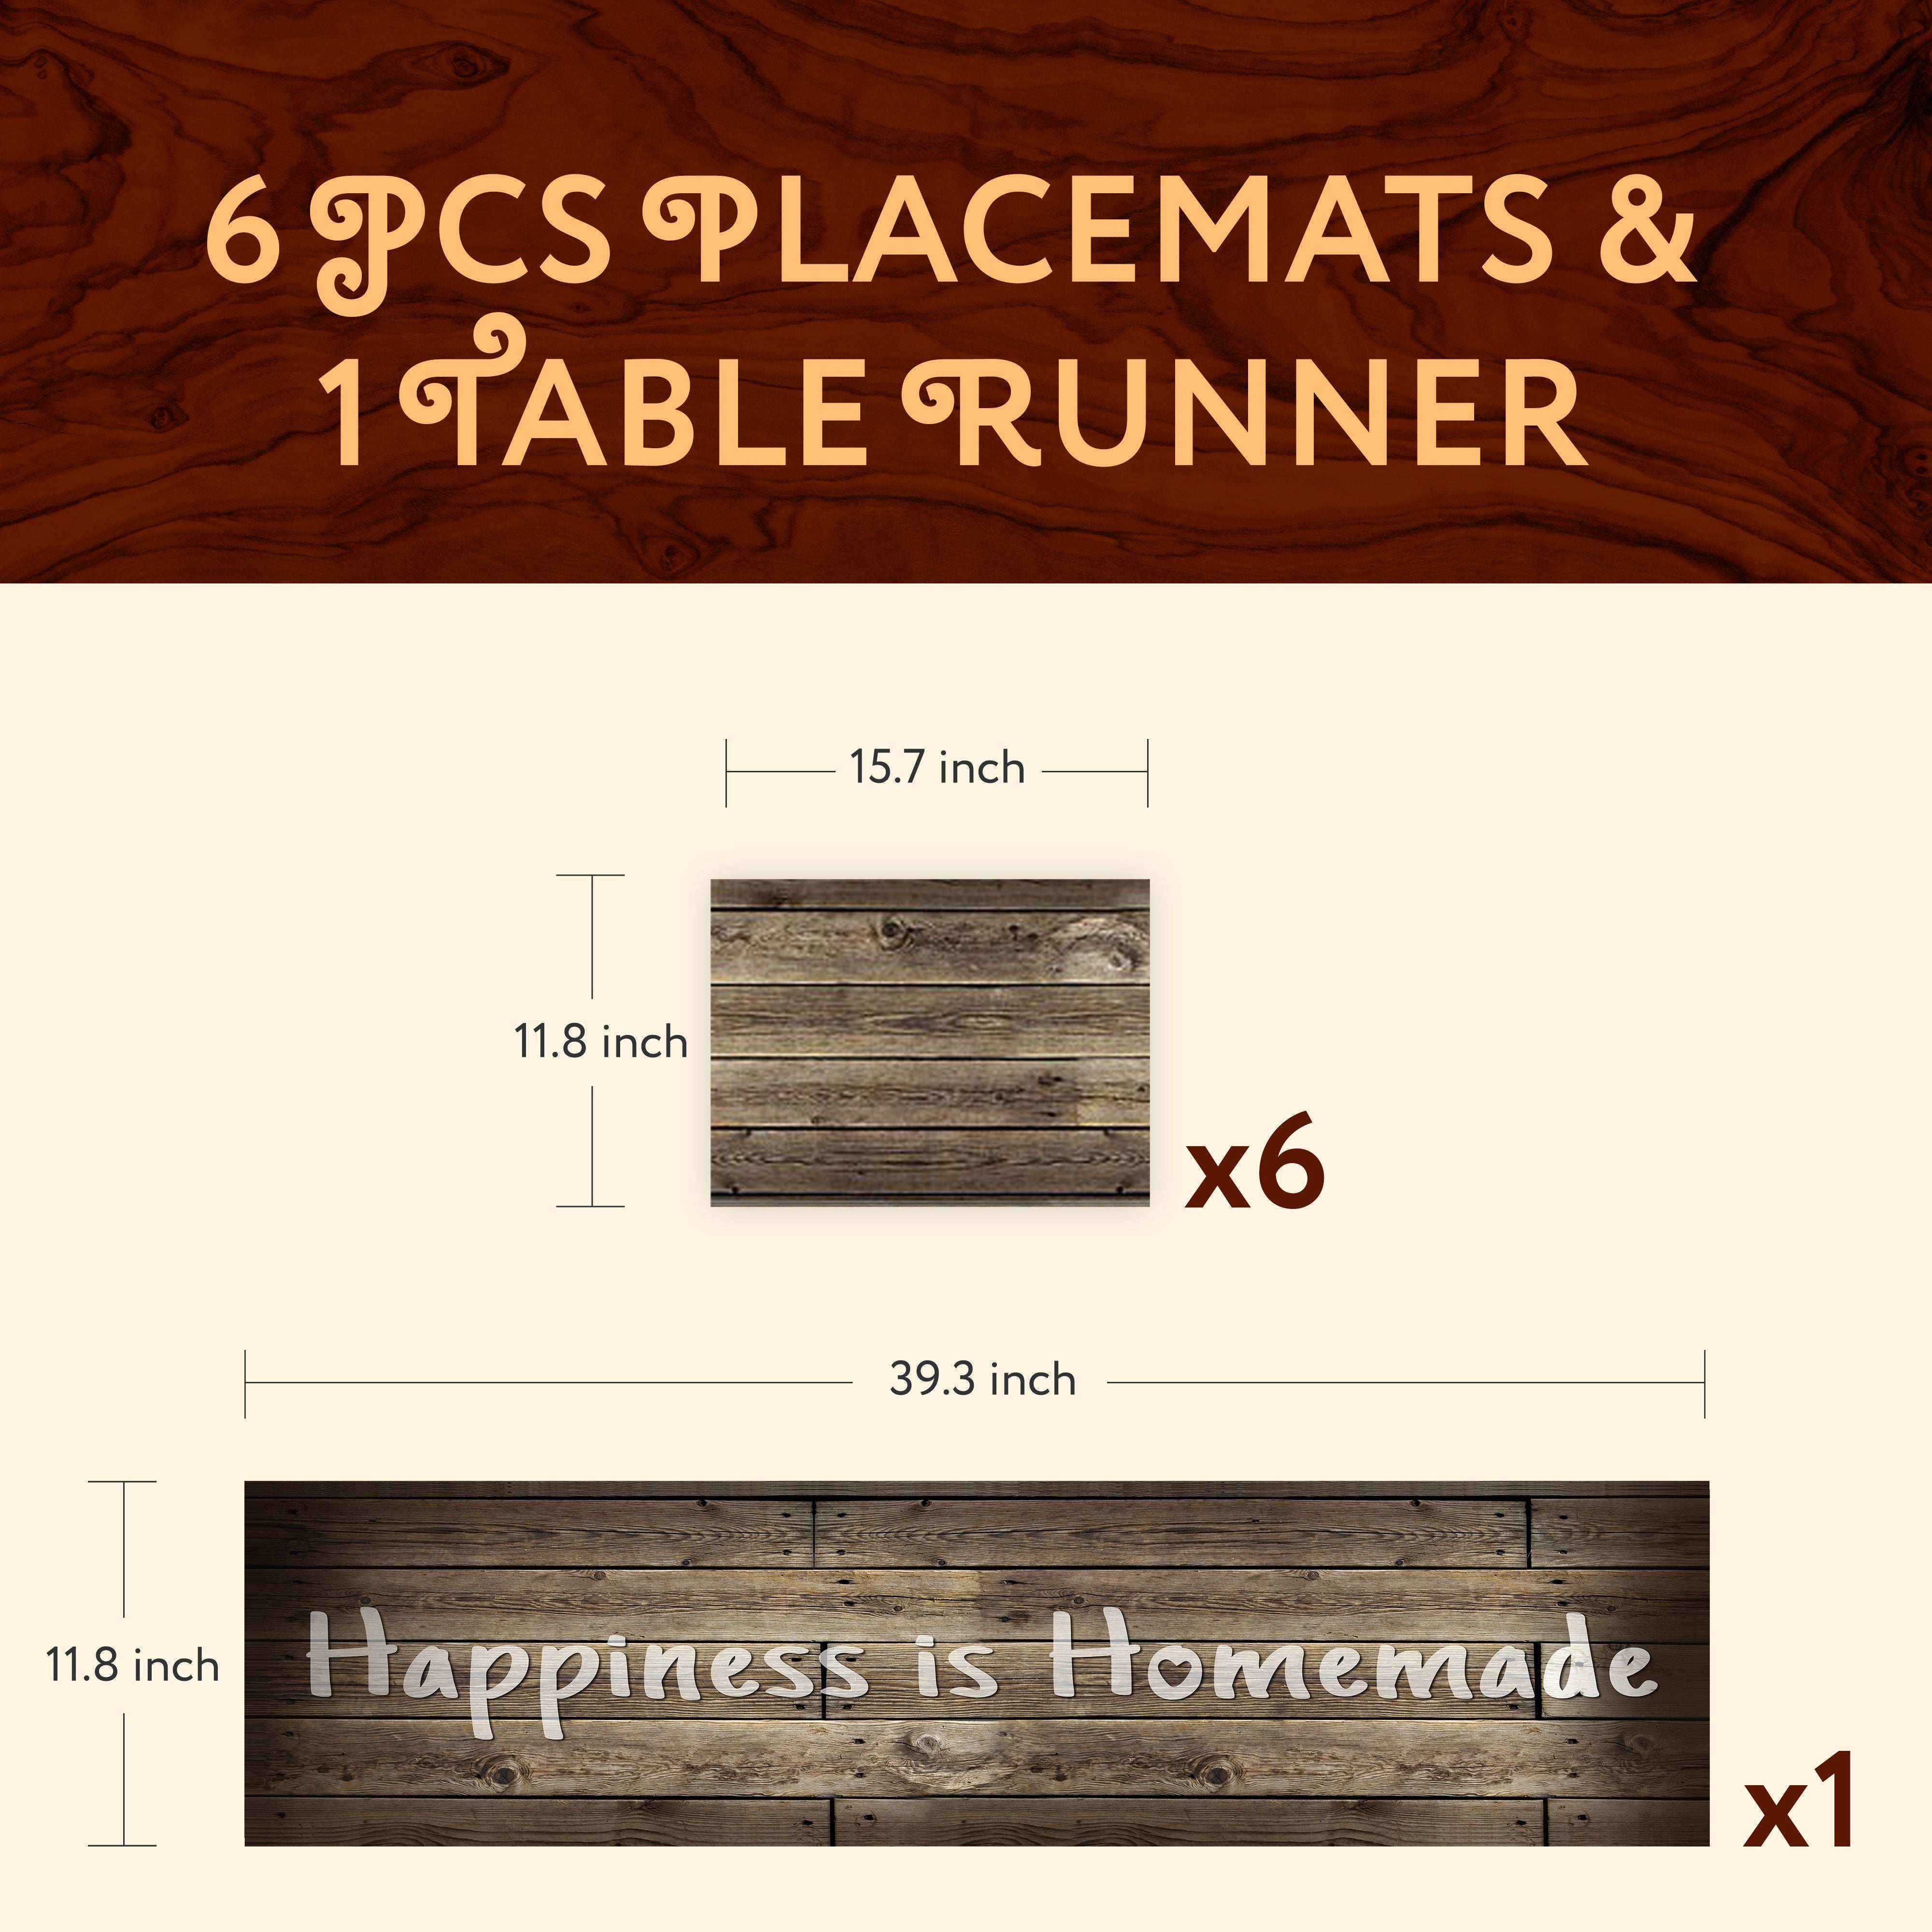 1 TABLE RUNNER + 6 PLACEMATS SET (WOODEN RUSTIC)